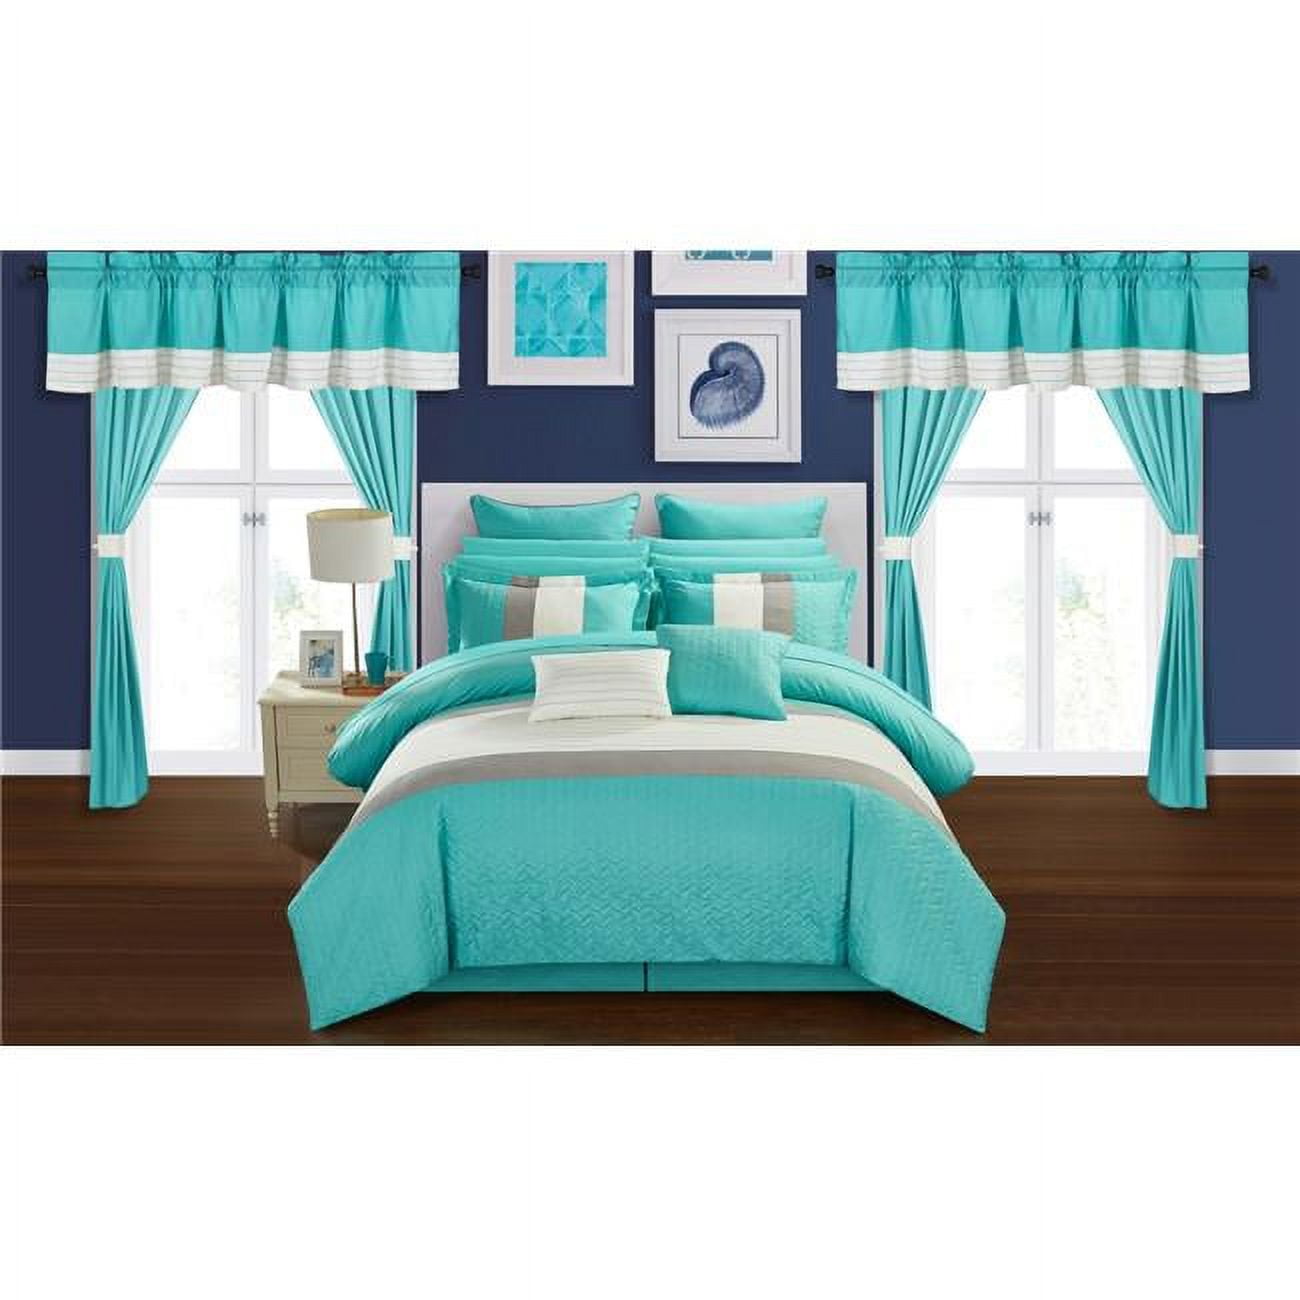 Cs0866-us 24 Piece Quilted Embroidered Complete Comforter Bed Set, Turquoise - Queen